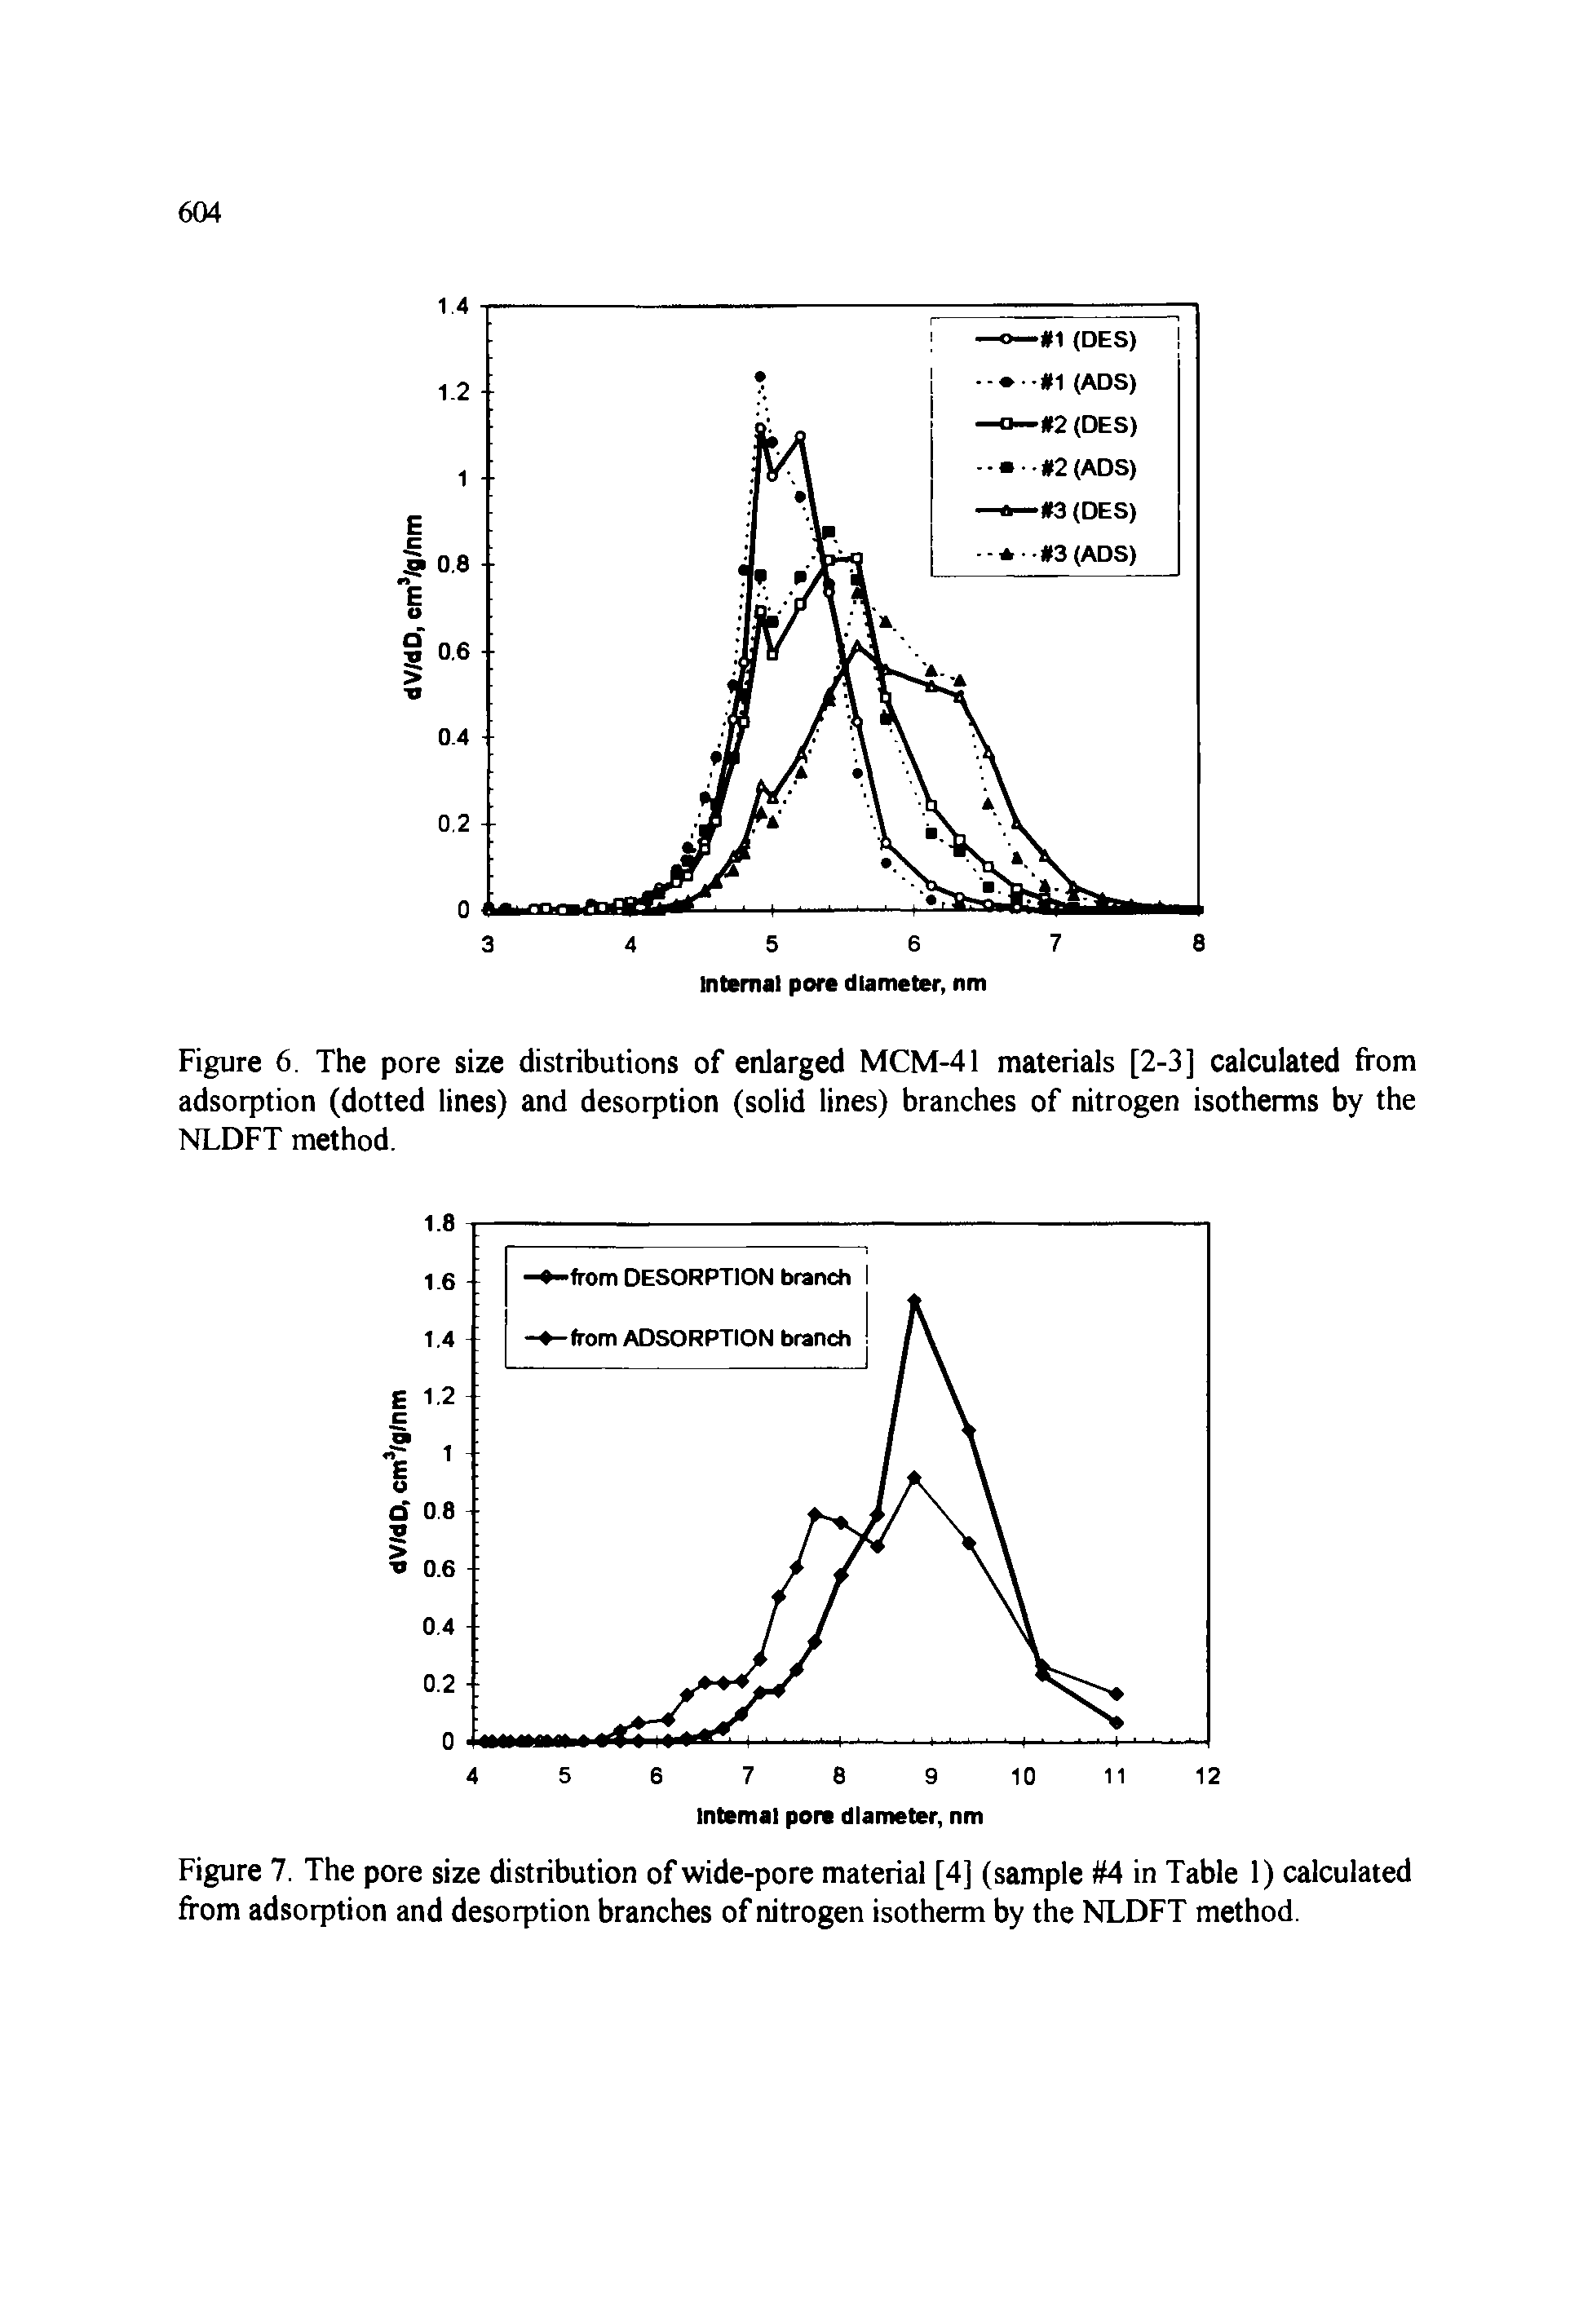 Figure 6. The pore size distributions of enlarged MCM-41 materials [2-3] calculated from adsorption (dotted lines) and desorption (solid lines) branches of nitrogen isotherms by the NLDFT method.